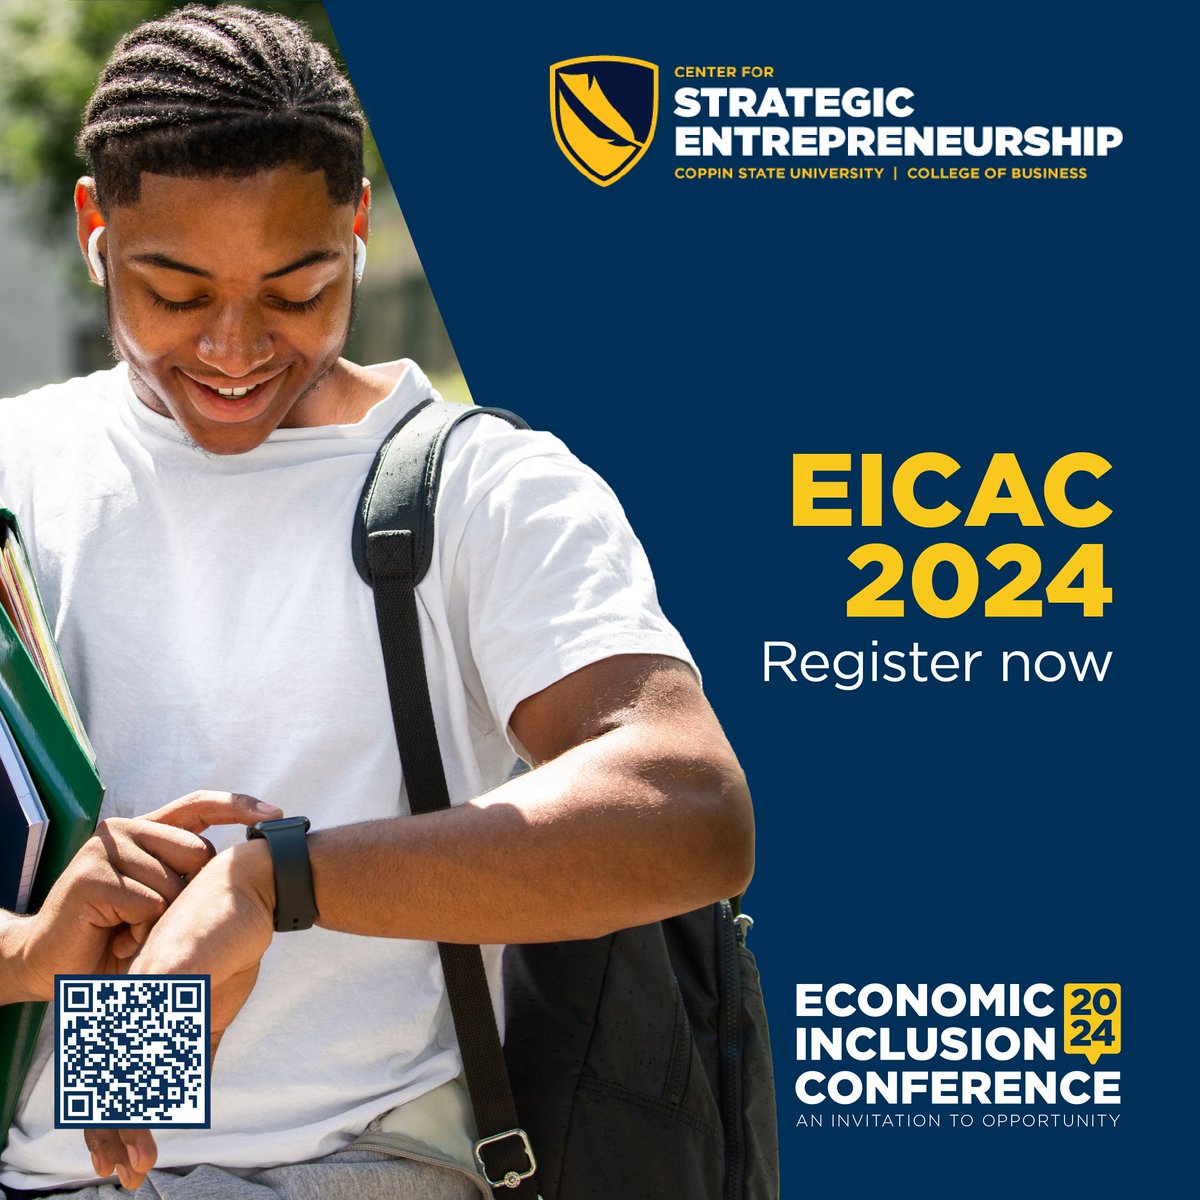 Calling all young innovators! Network with industry leaders, share ideas with fellow changemakers, and gain the skills you need to turn your passion into a thriving business. Register now: coppin.edu/eicac #EICAC2024 #Entrepreneurship